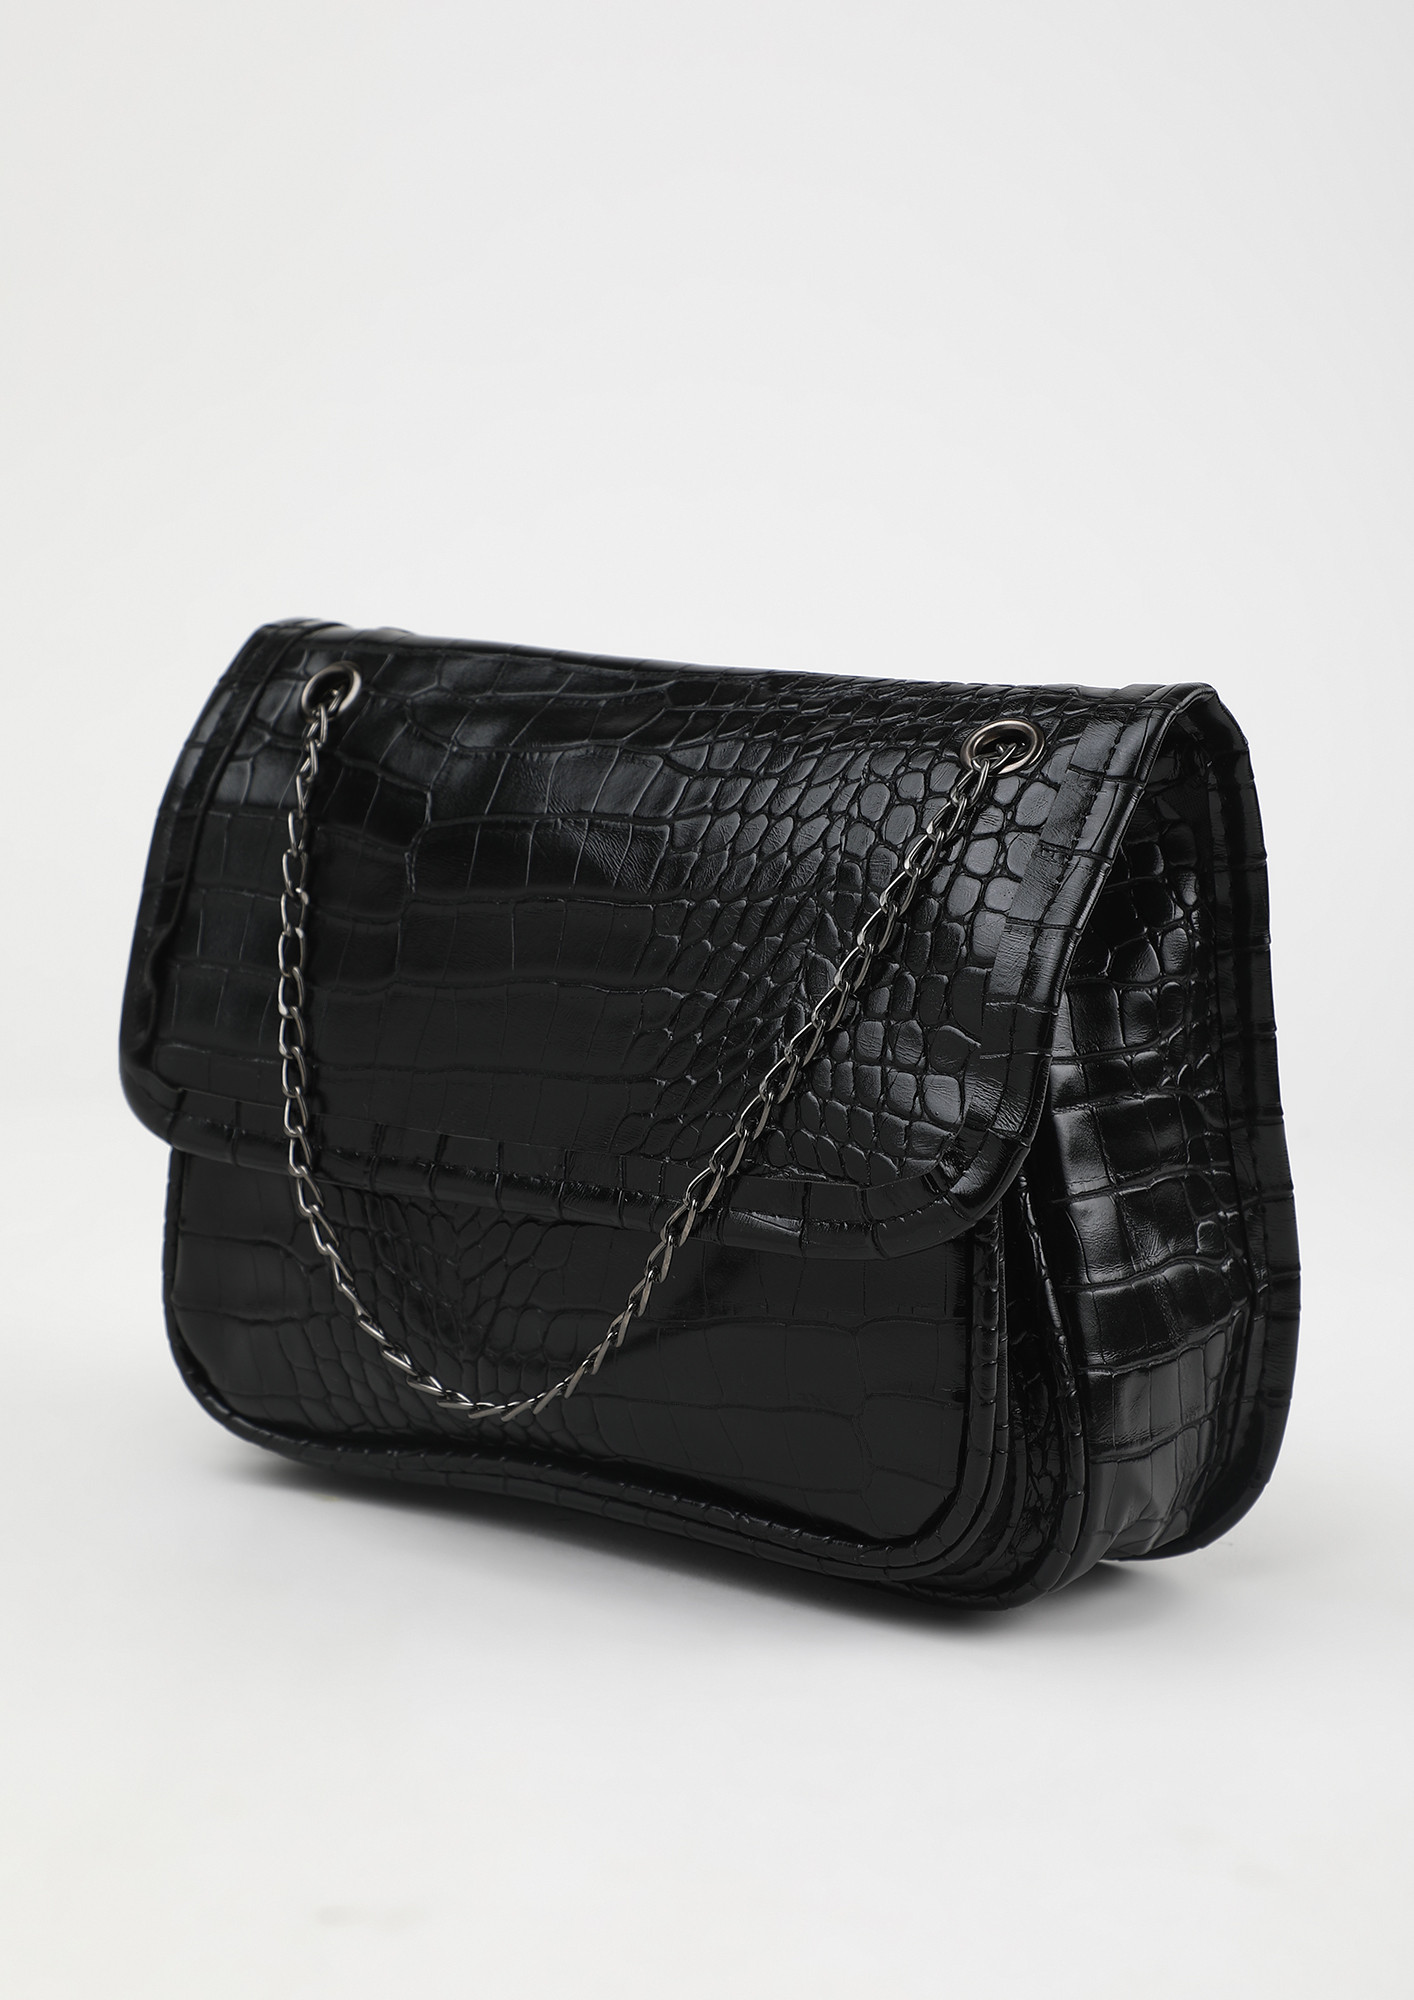 POUCH IT UP BLACK SLING BAG